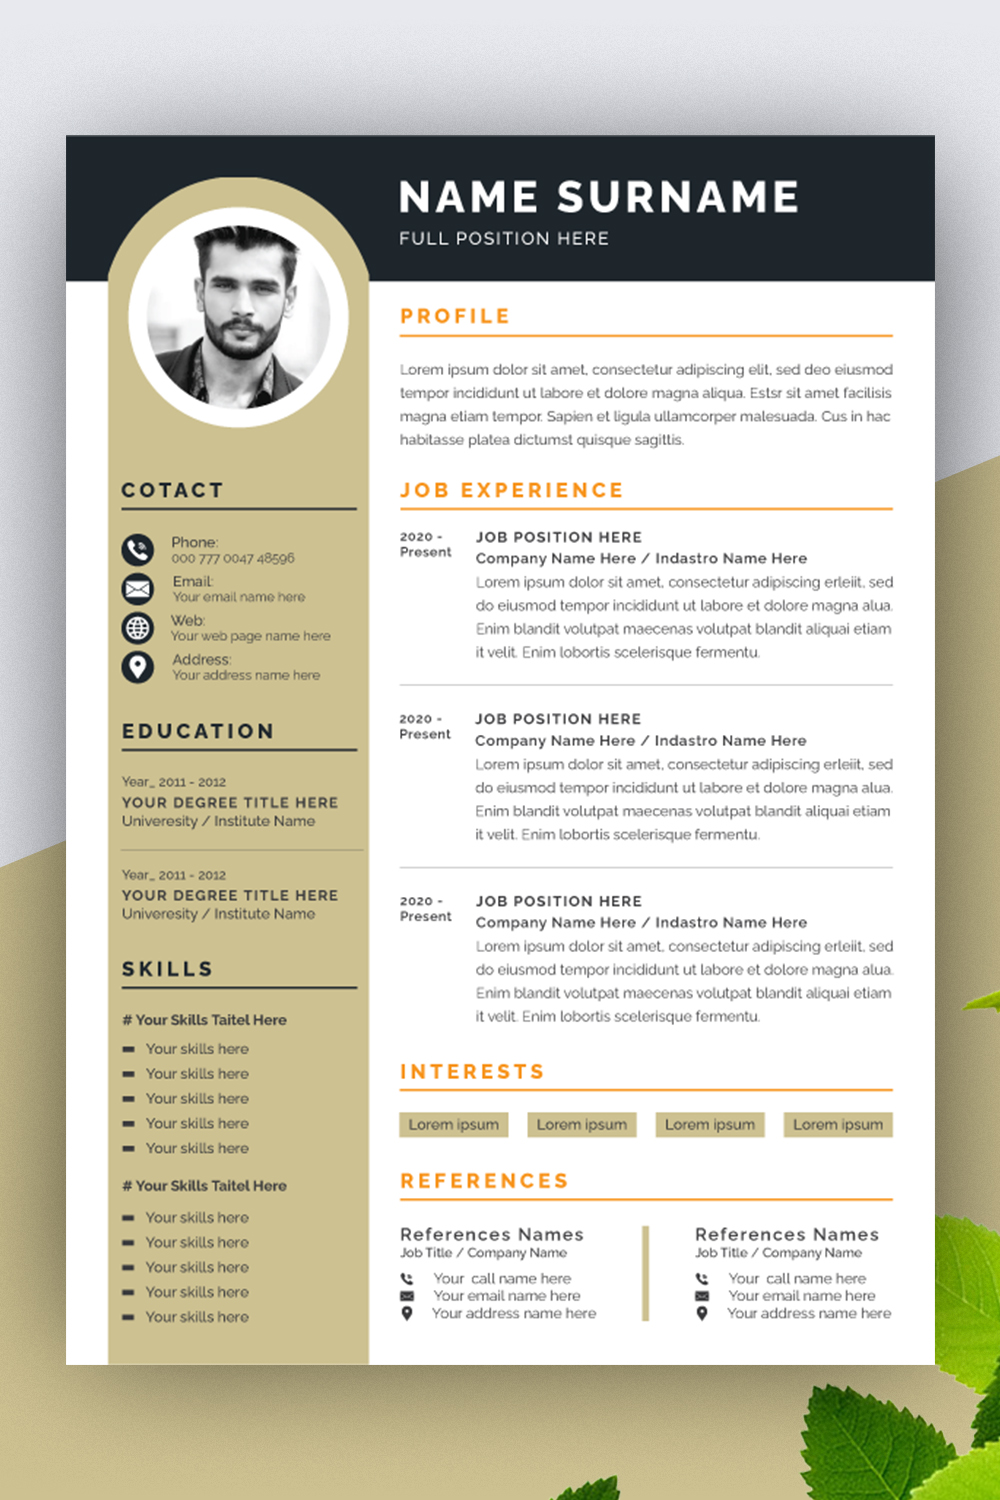 Professional Resume Layout with Photo Placeholder pinterest preview image.